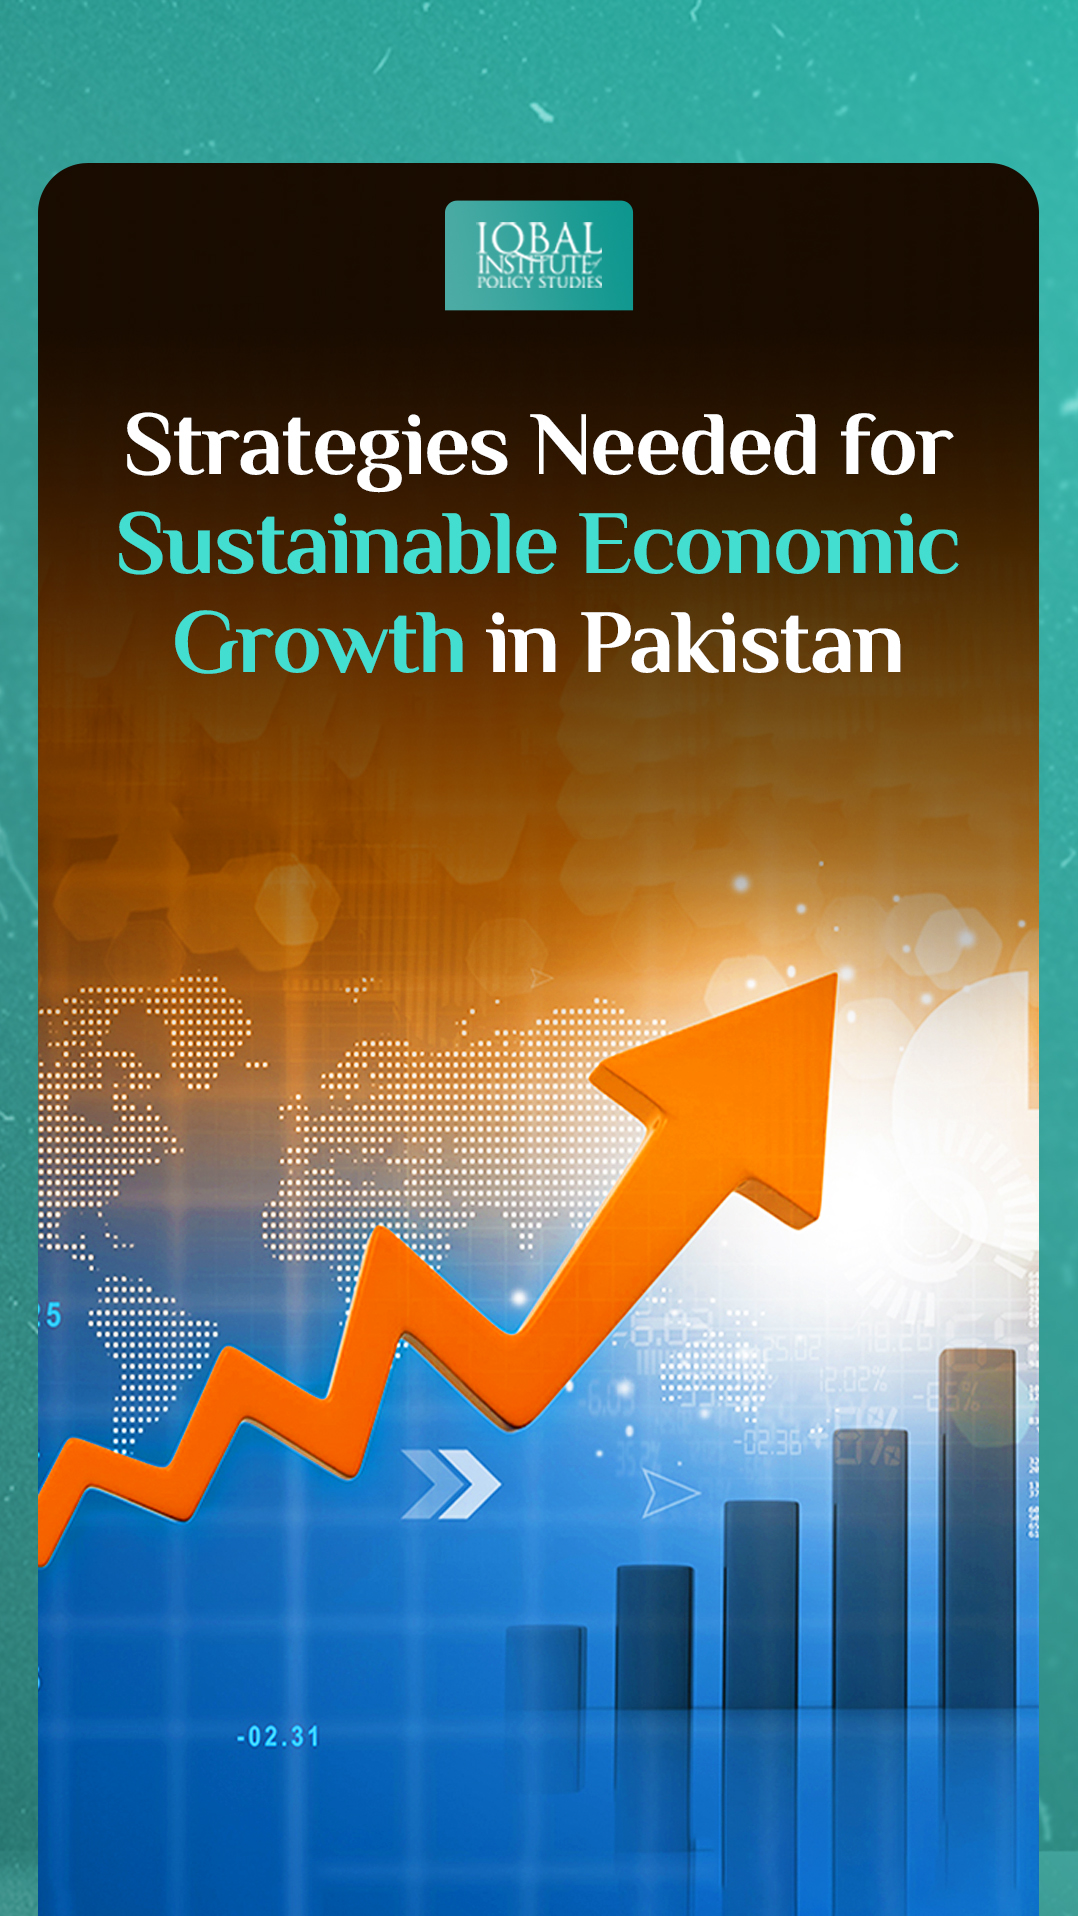 Strategies needed for sustainable economic growth in Pakistan